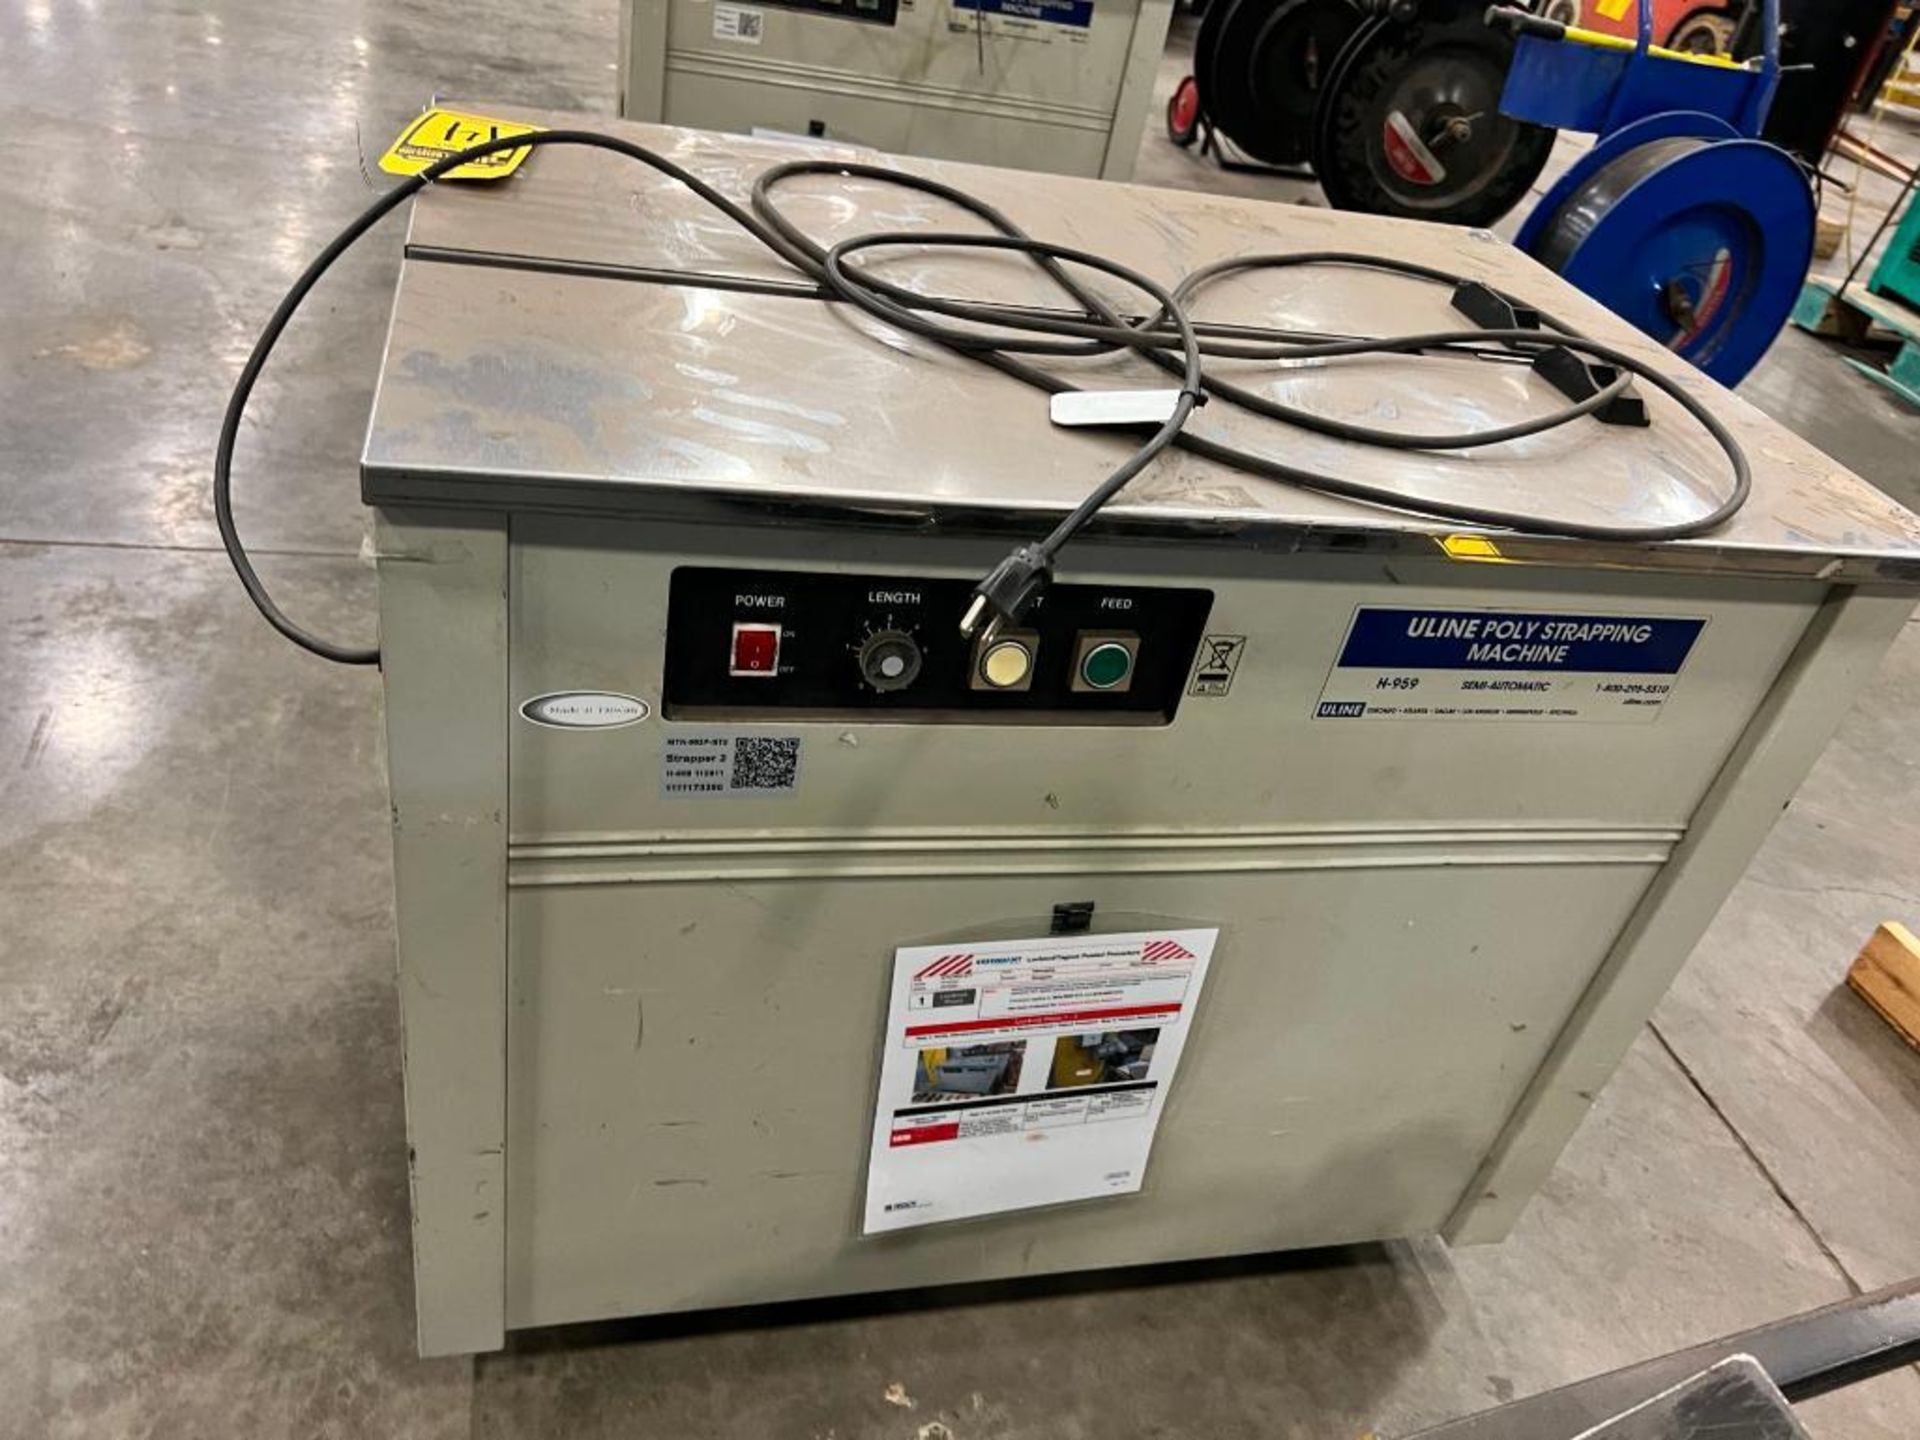 2011 Uline Poly Strapping Machine, Model H-959, S/N 111-117-3390, Single Phase ($15 Loading fee will